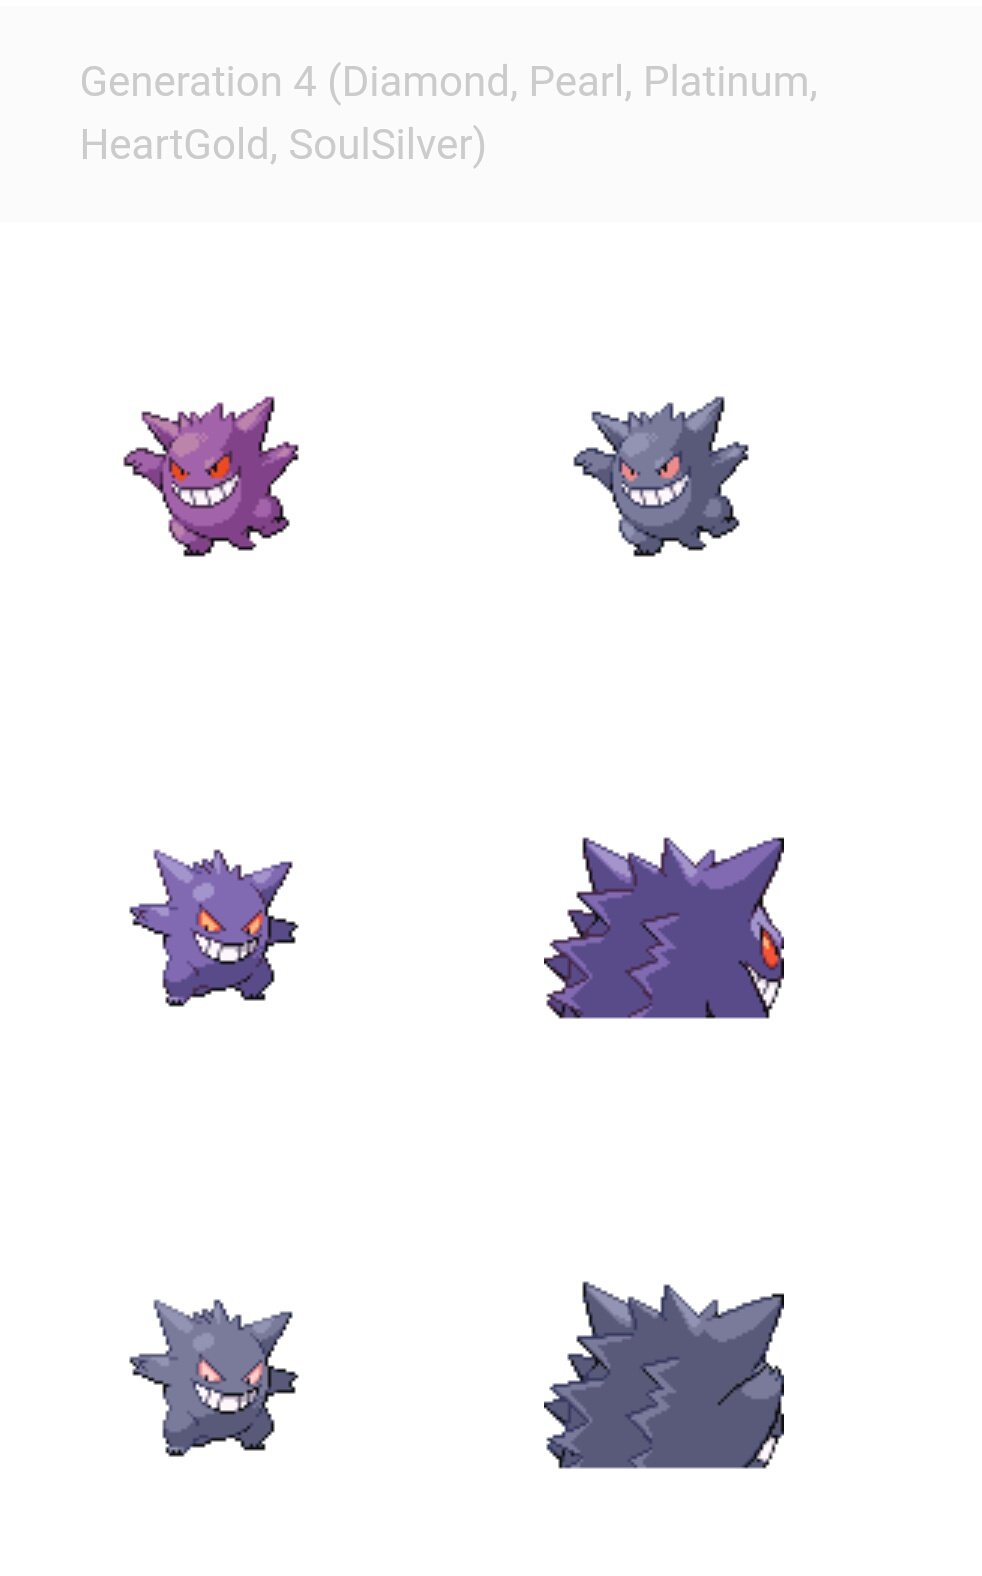 Ozi Oni 🏳️‍🌈 on X: @theSupremeRk9s gen 2 shiny gengar was peak but the  shiny wasn't really irredeemable until HGSS where they made regular Gengar  more blue and got even worse from